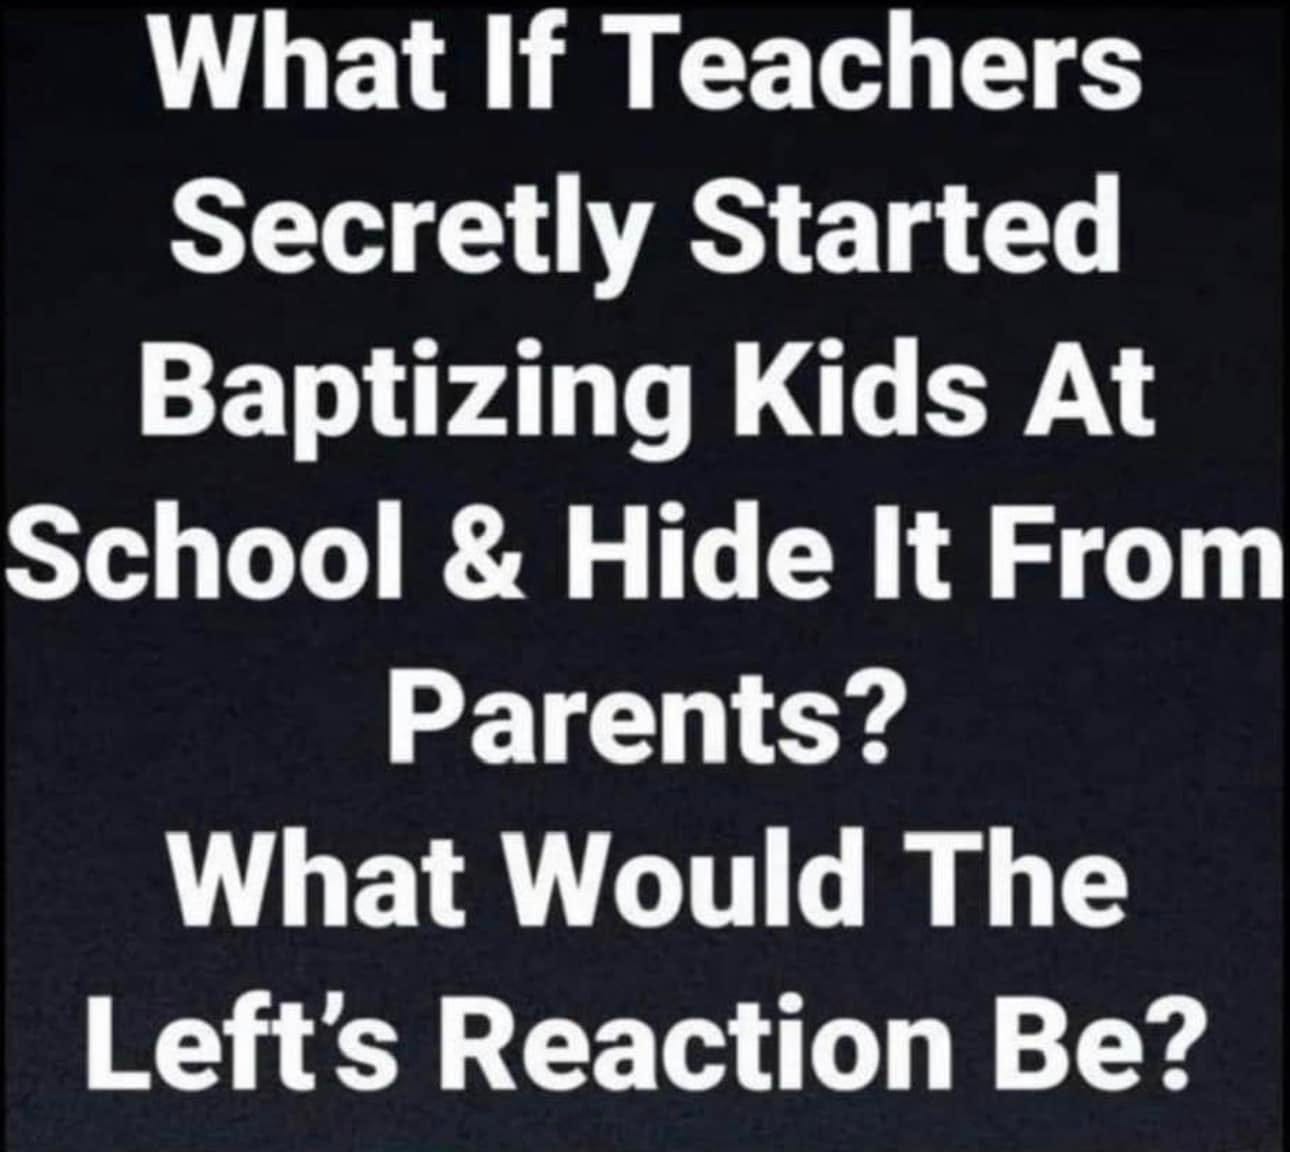 May be an image of text that says 'What If Teachers Secretly Started Baptizing Kids At School & Hide It From Parents? What Would The Left's Reaction Be?'